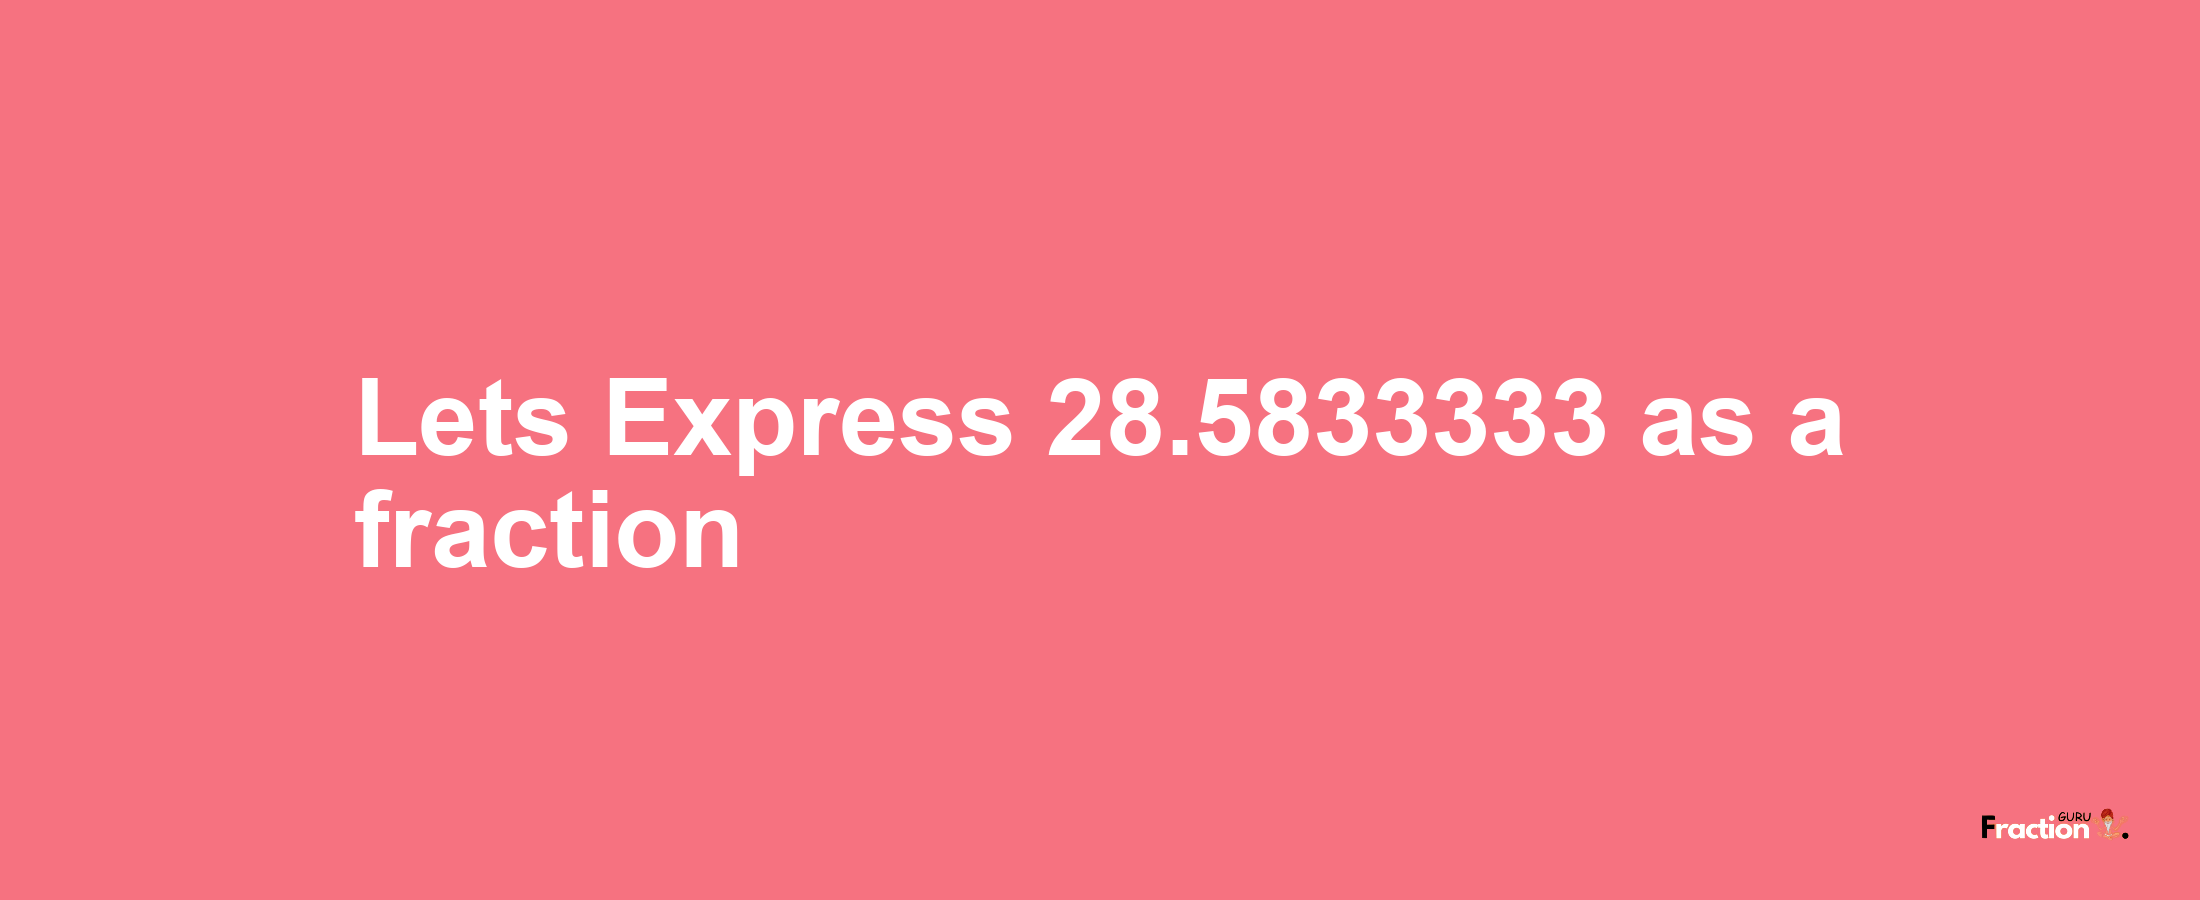 Lets Express 28.5833333 as afraction